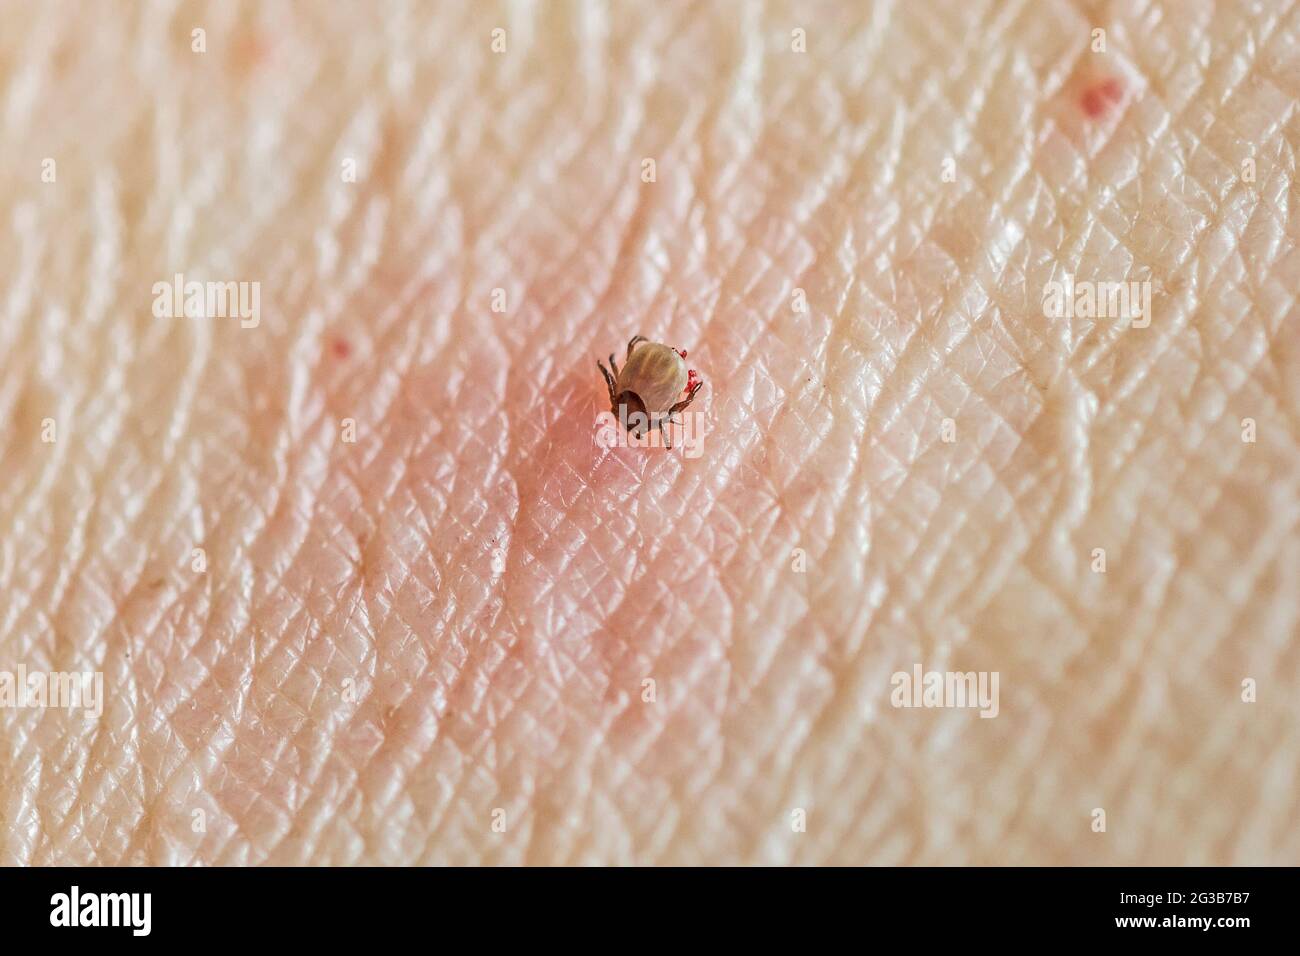 Engorged, feeding adult female deer tick, Ixodes scapularis, laying red eggs, protruding under it's body, sucking blood from skin of human female. Stock Photo